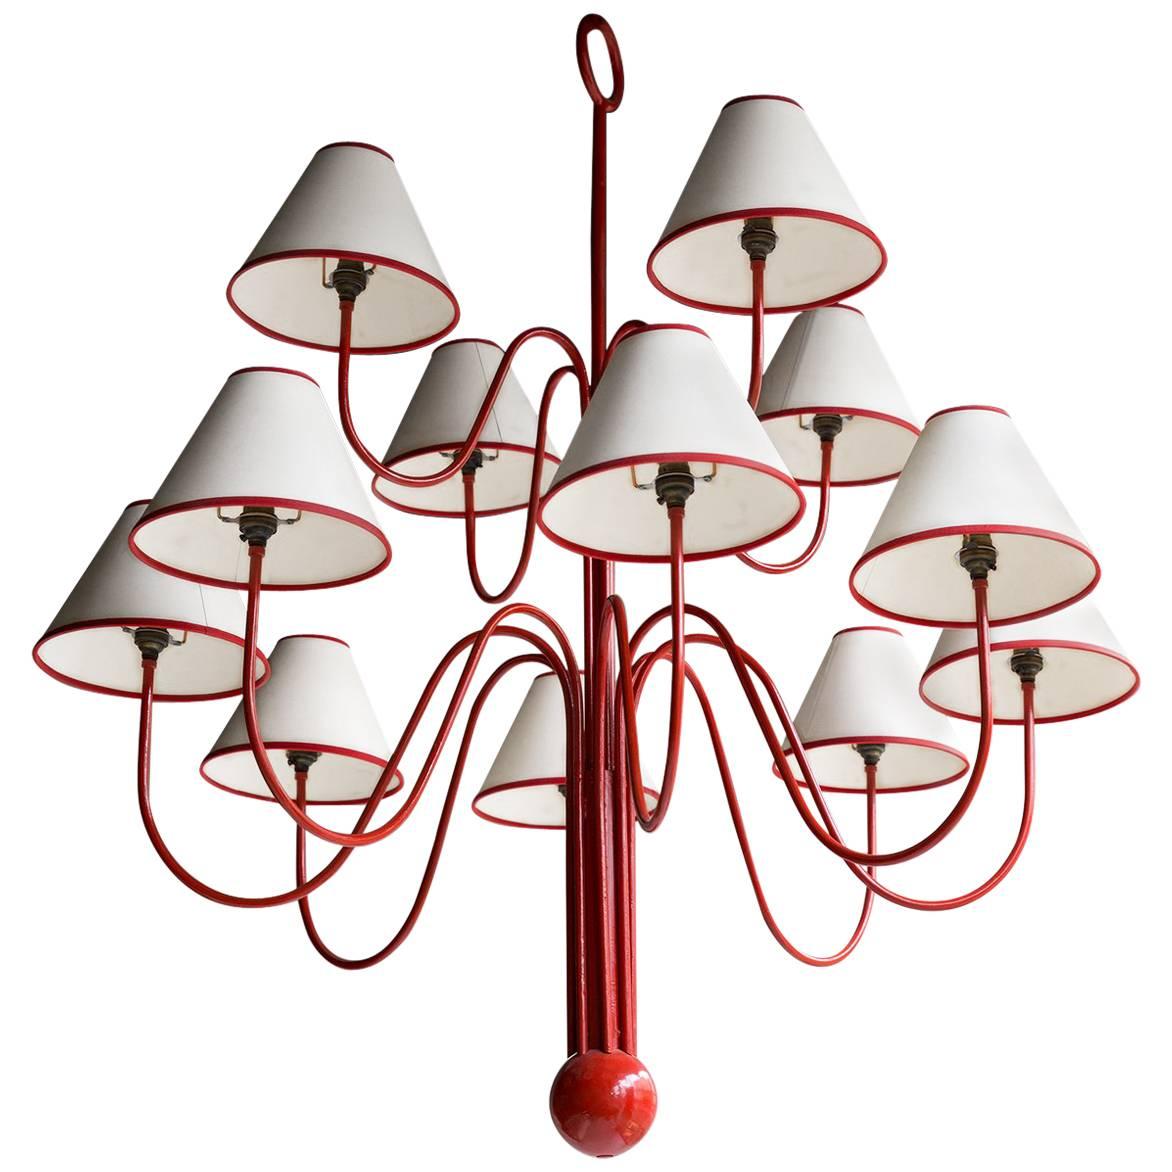 Red Lacquered Tubular Steel Chandelier, style of Jean Royere